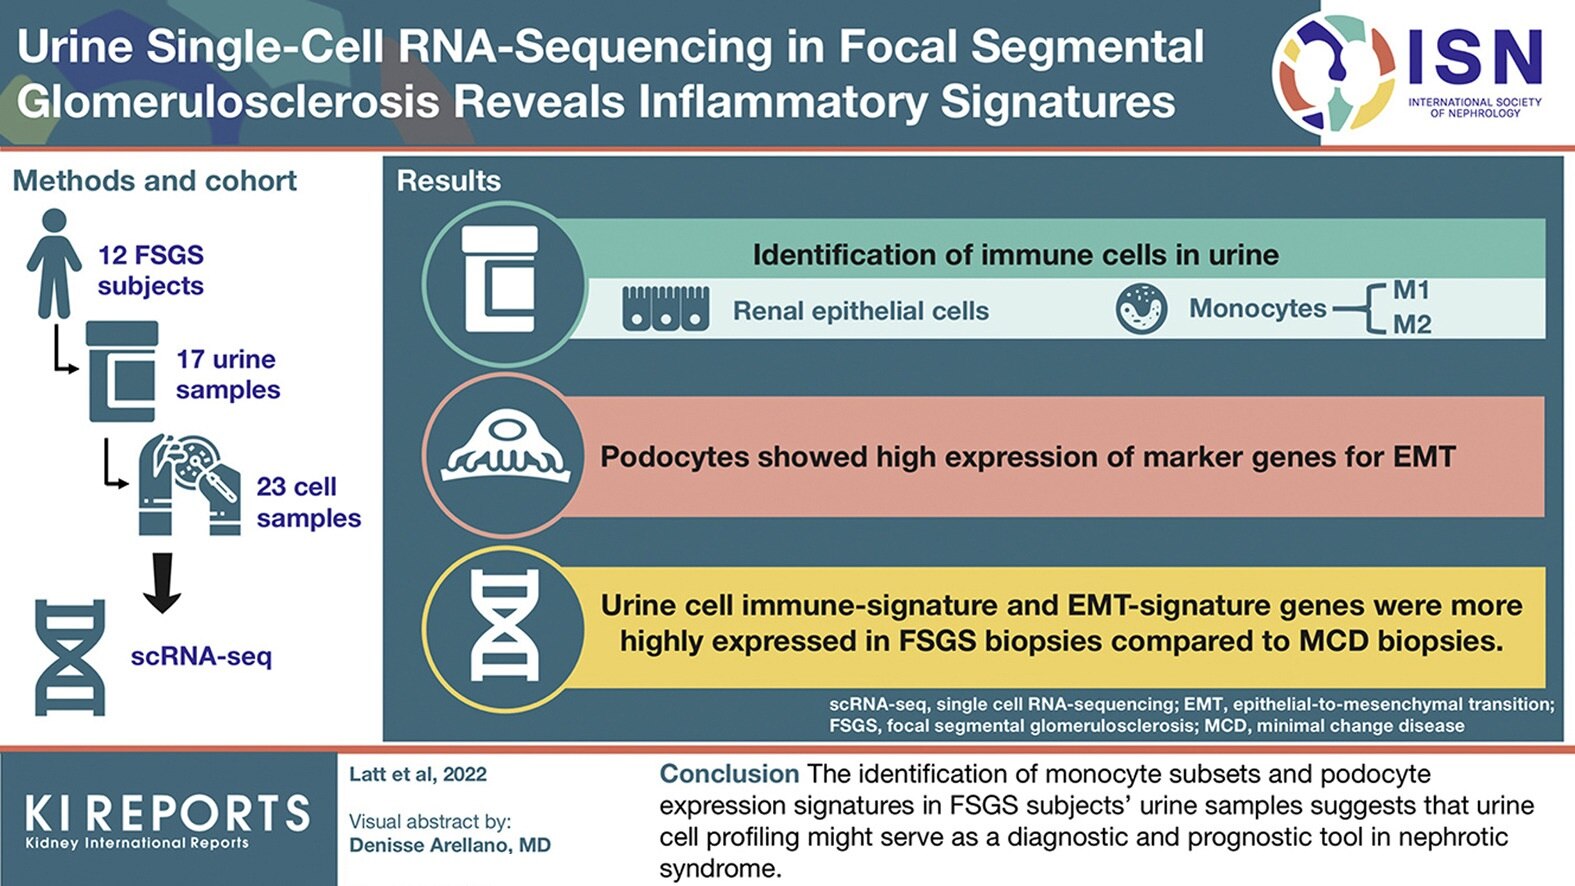 Urine single-cell RNA-sequencing in focal segmental glomerulosclerosis reveals inflammatory signatures 